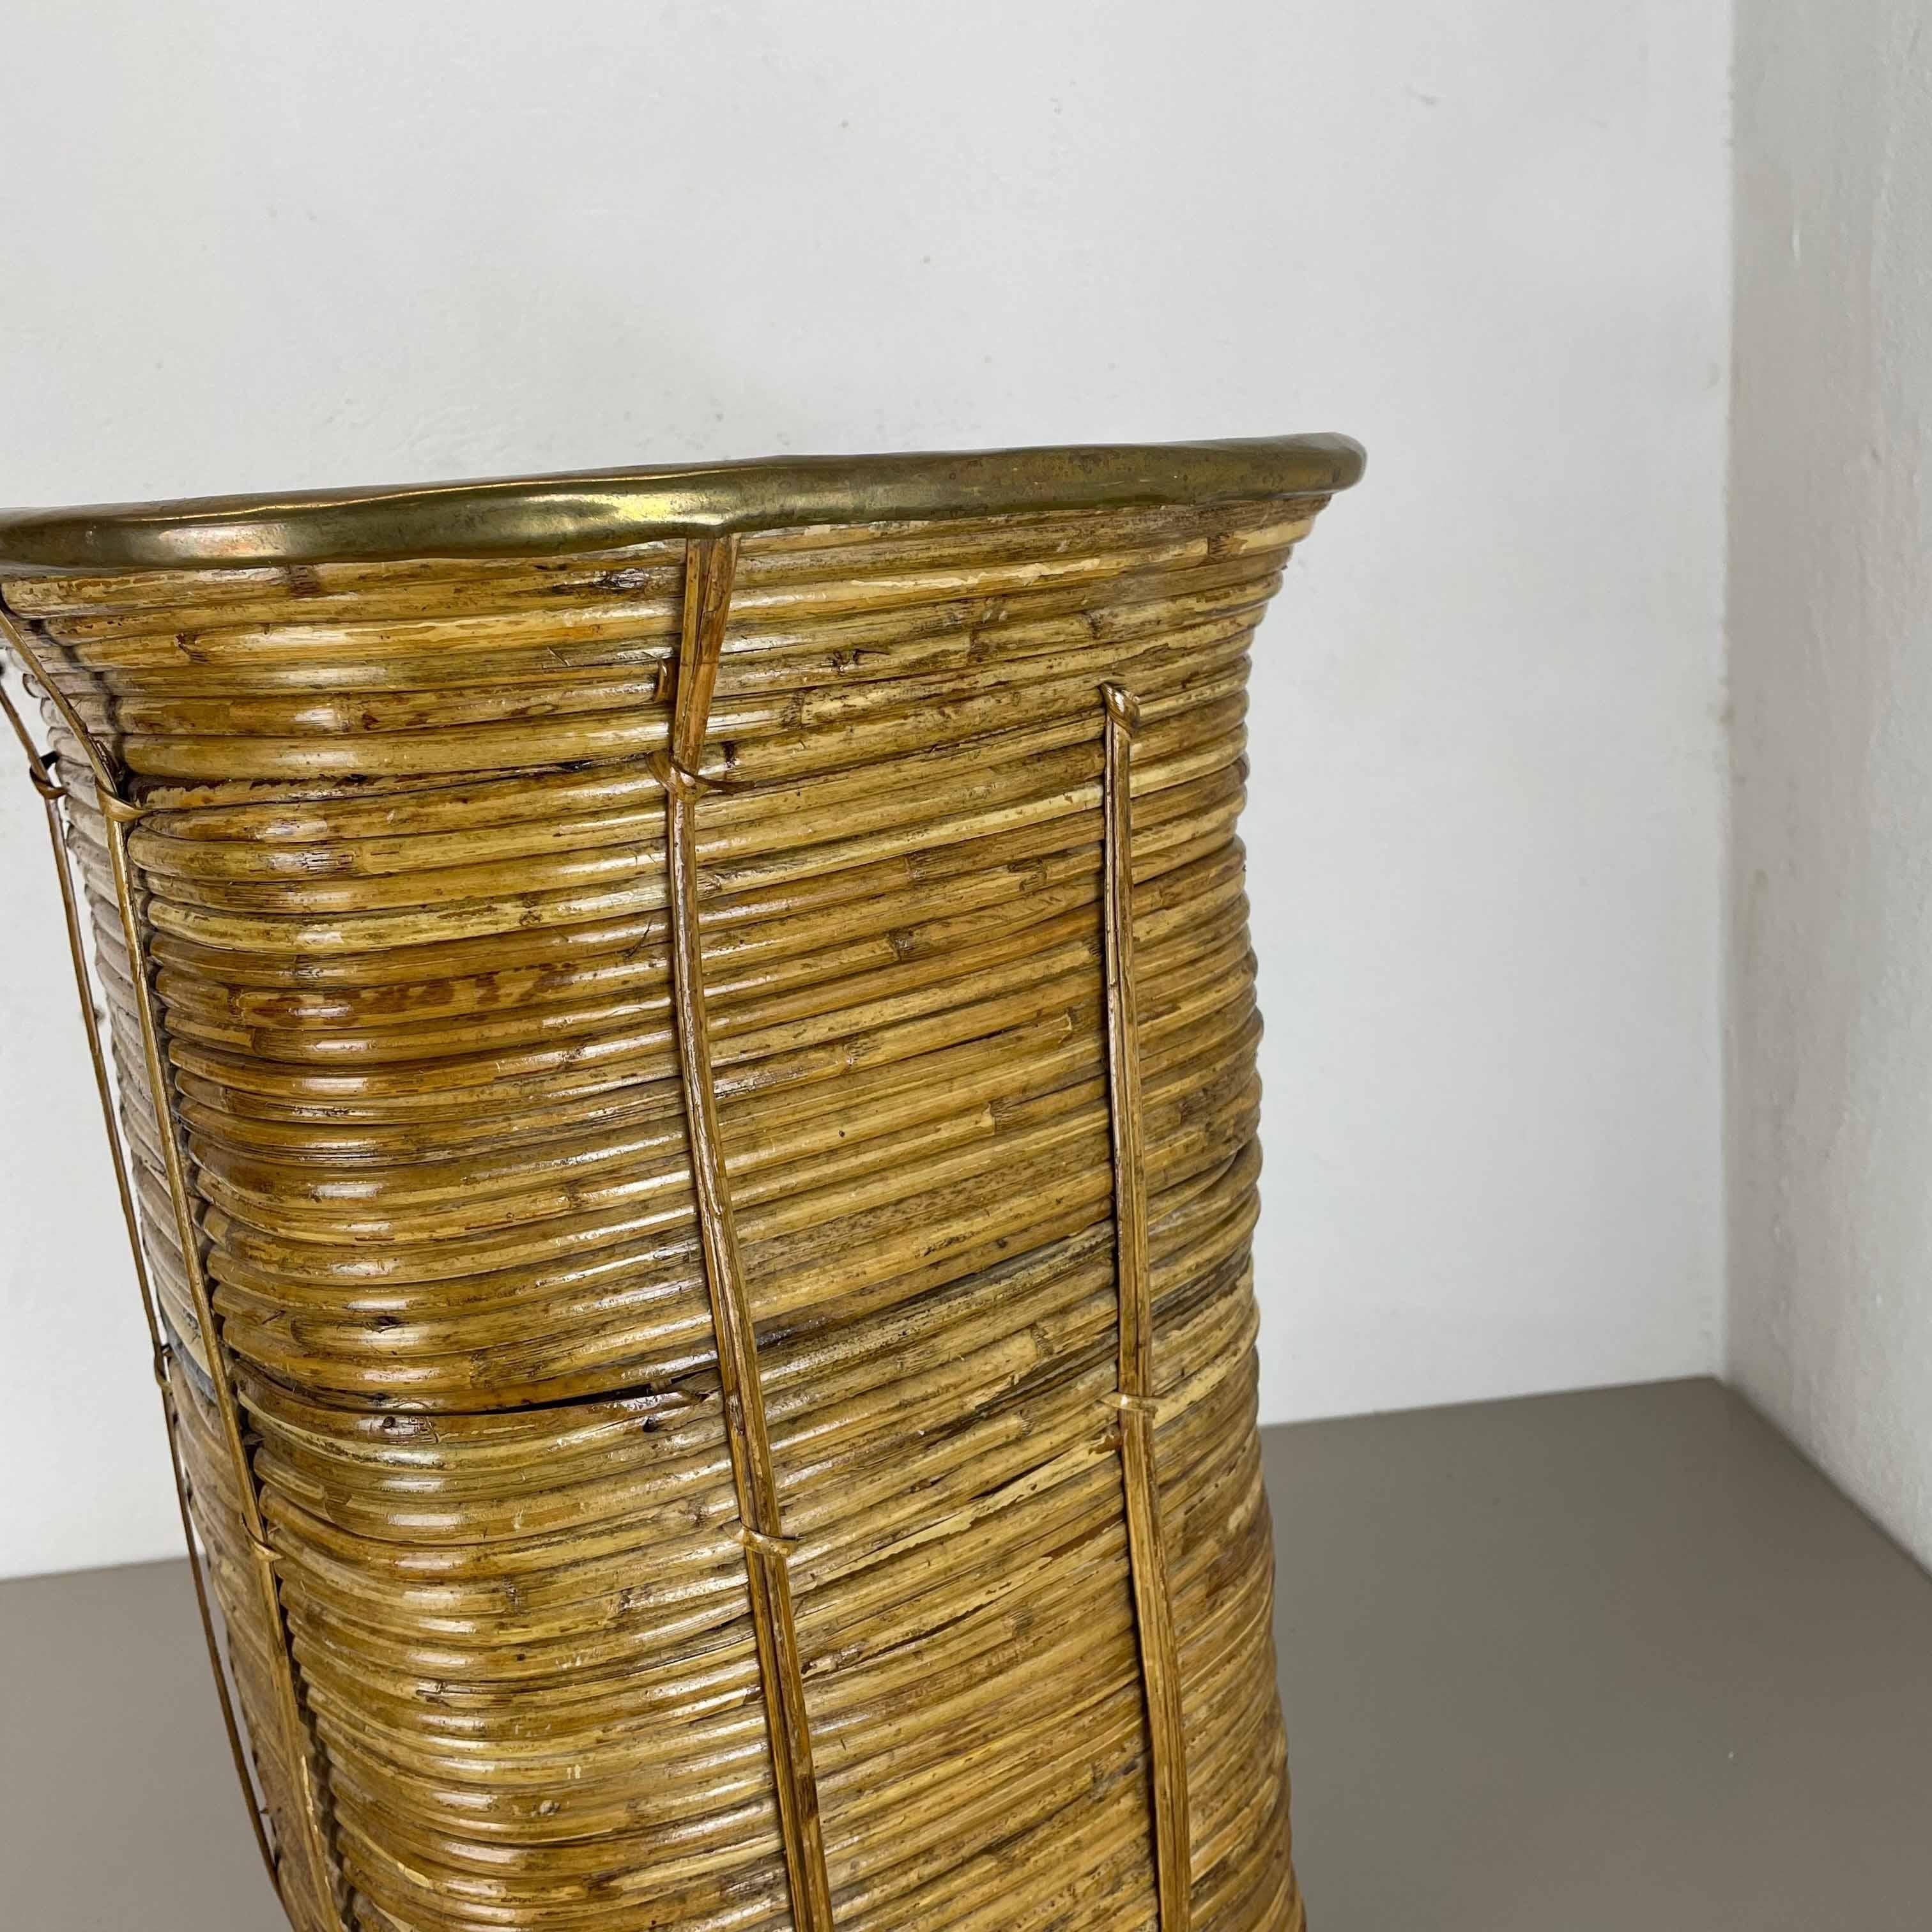 Aubock Style Rattan and Brass Bauhaus Waste Bin, Umbrella Stand, France, 1960s For Sale 3